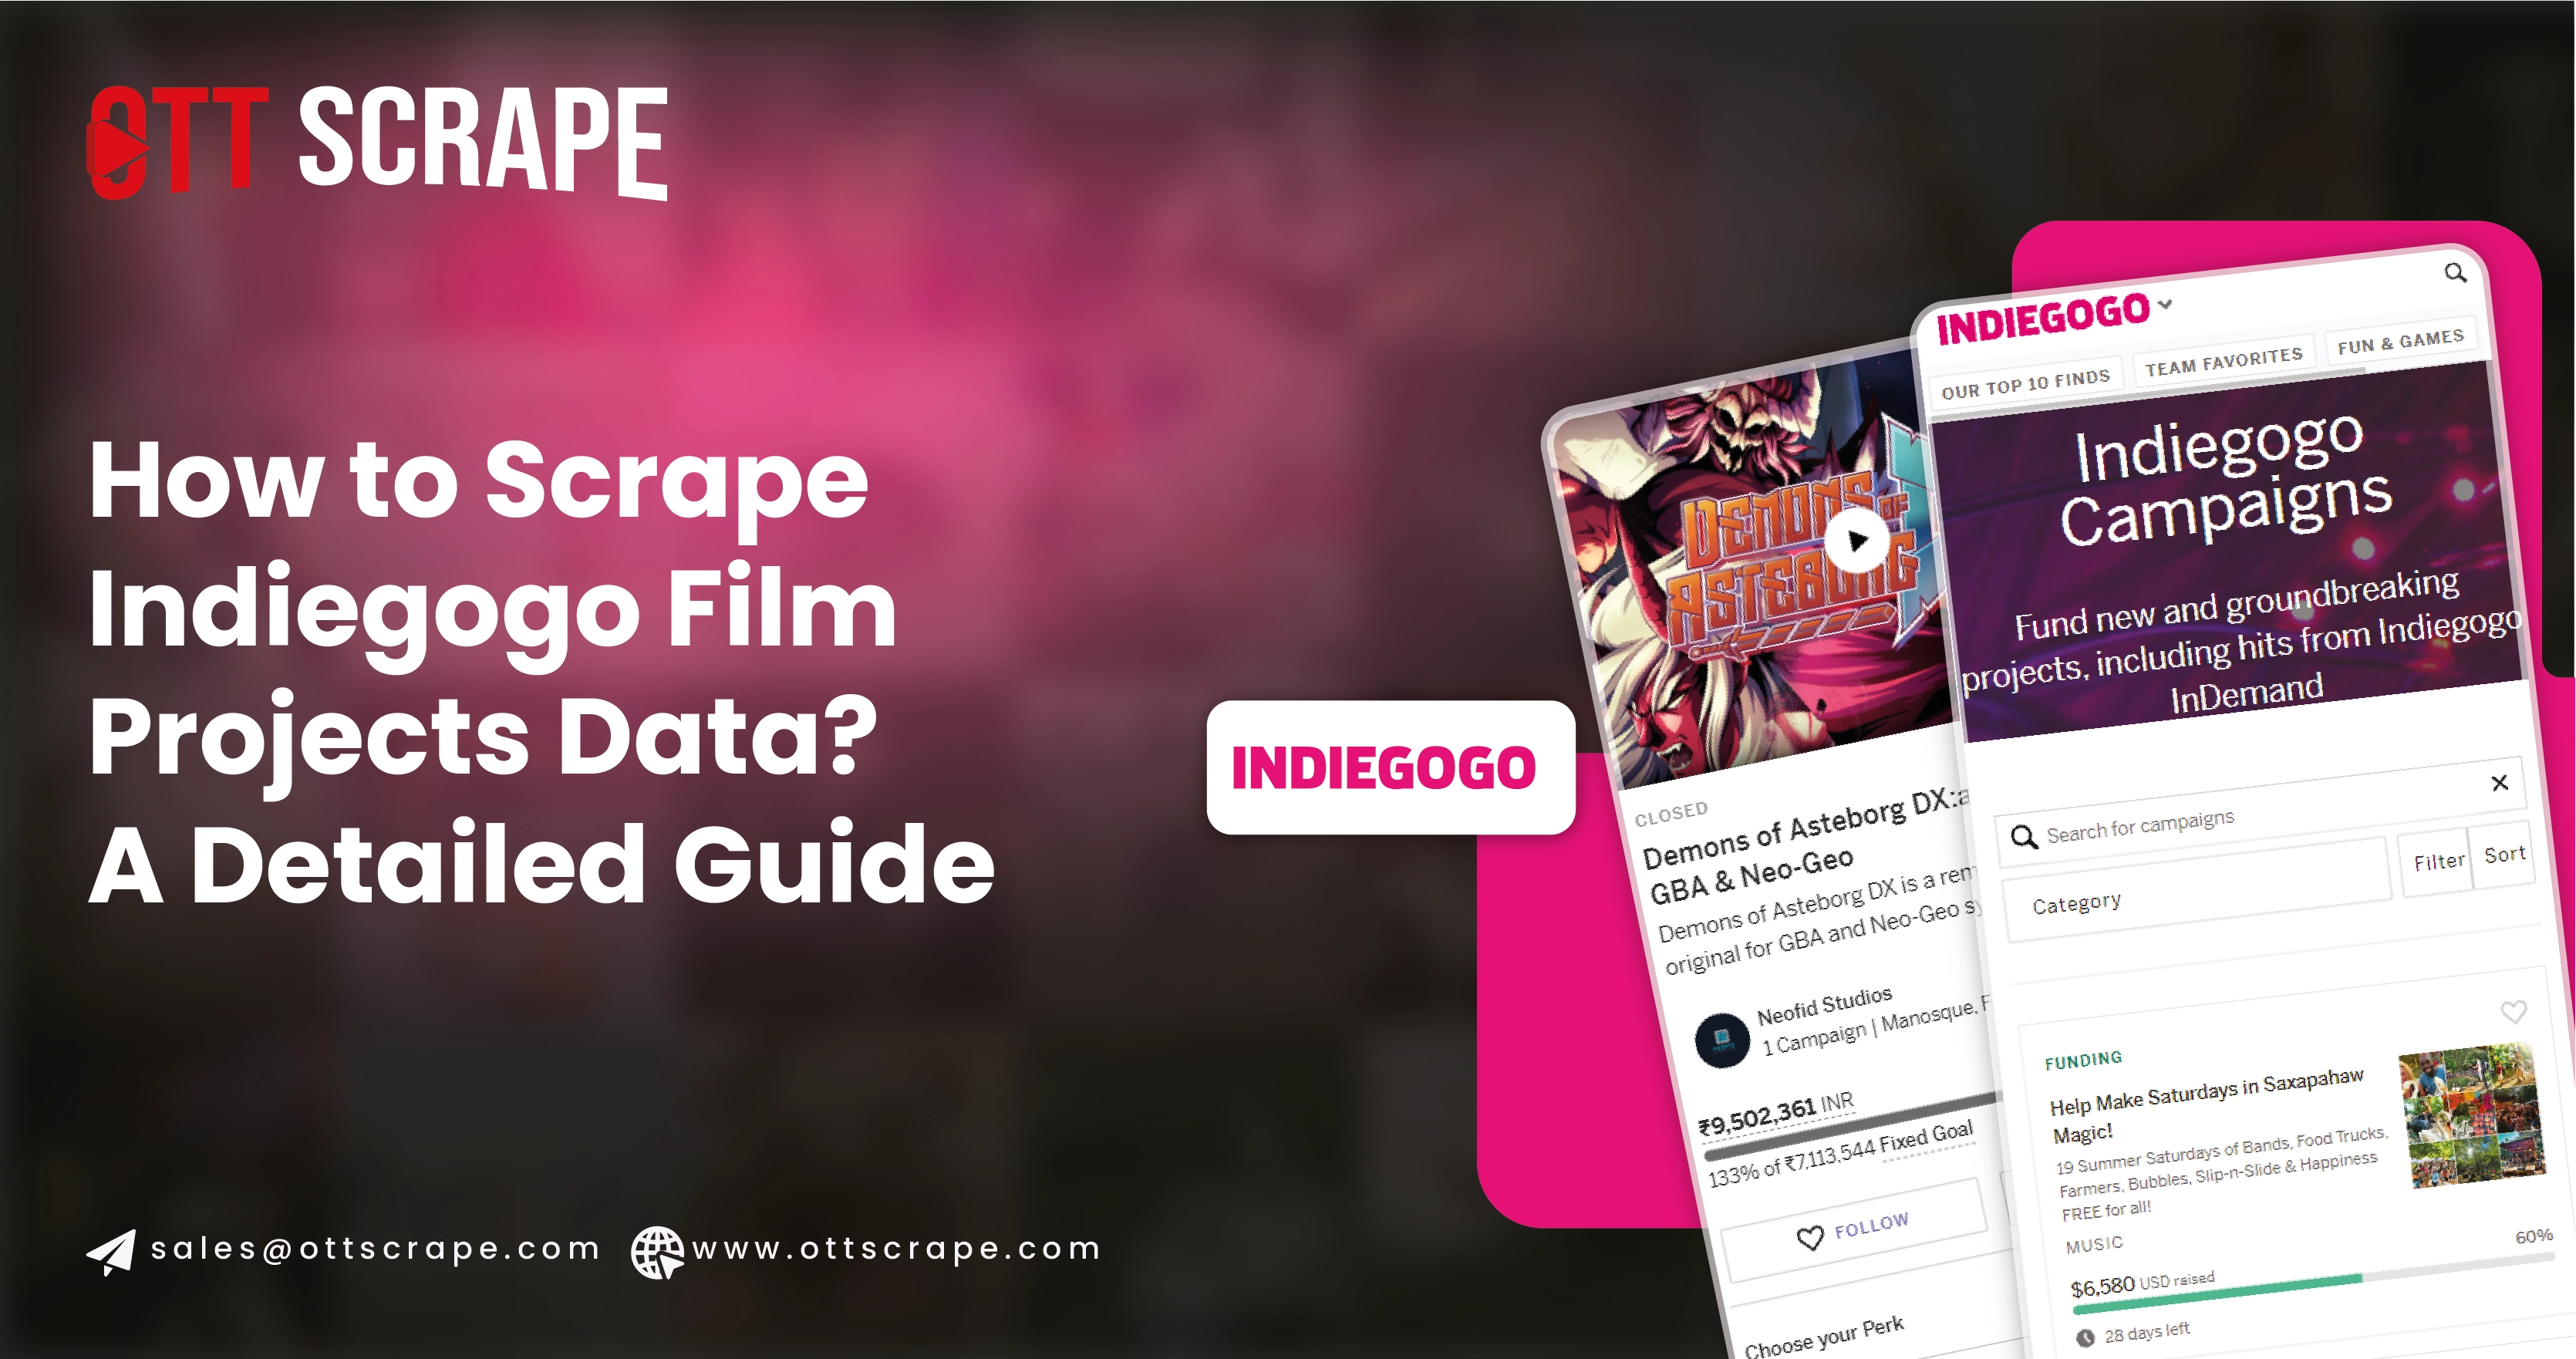 scrape-indiegogo-film-projects-data/How-to-Scrape-Indiegogo-Film-Projects-Data A-Detailed-Guide-01